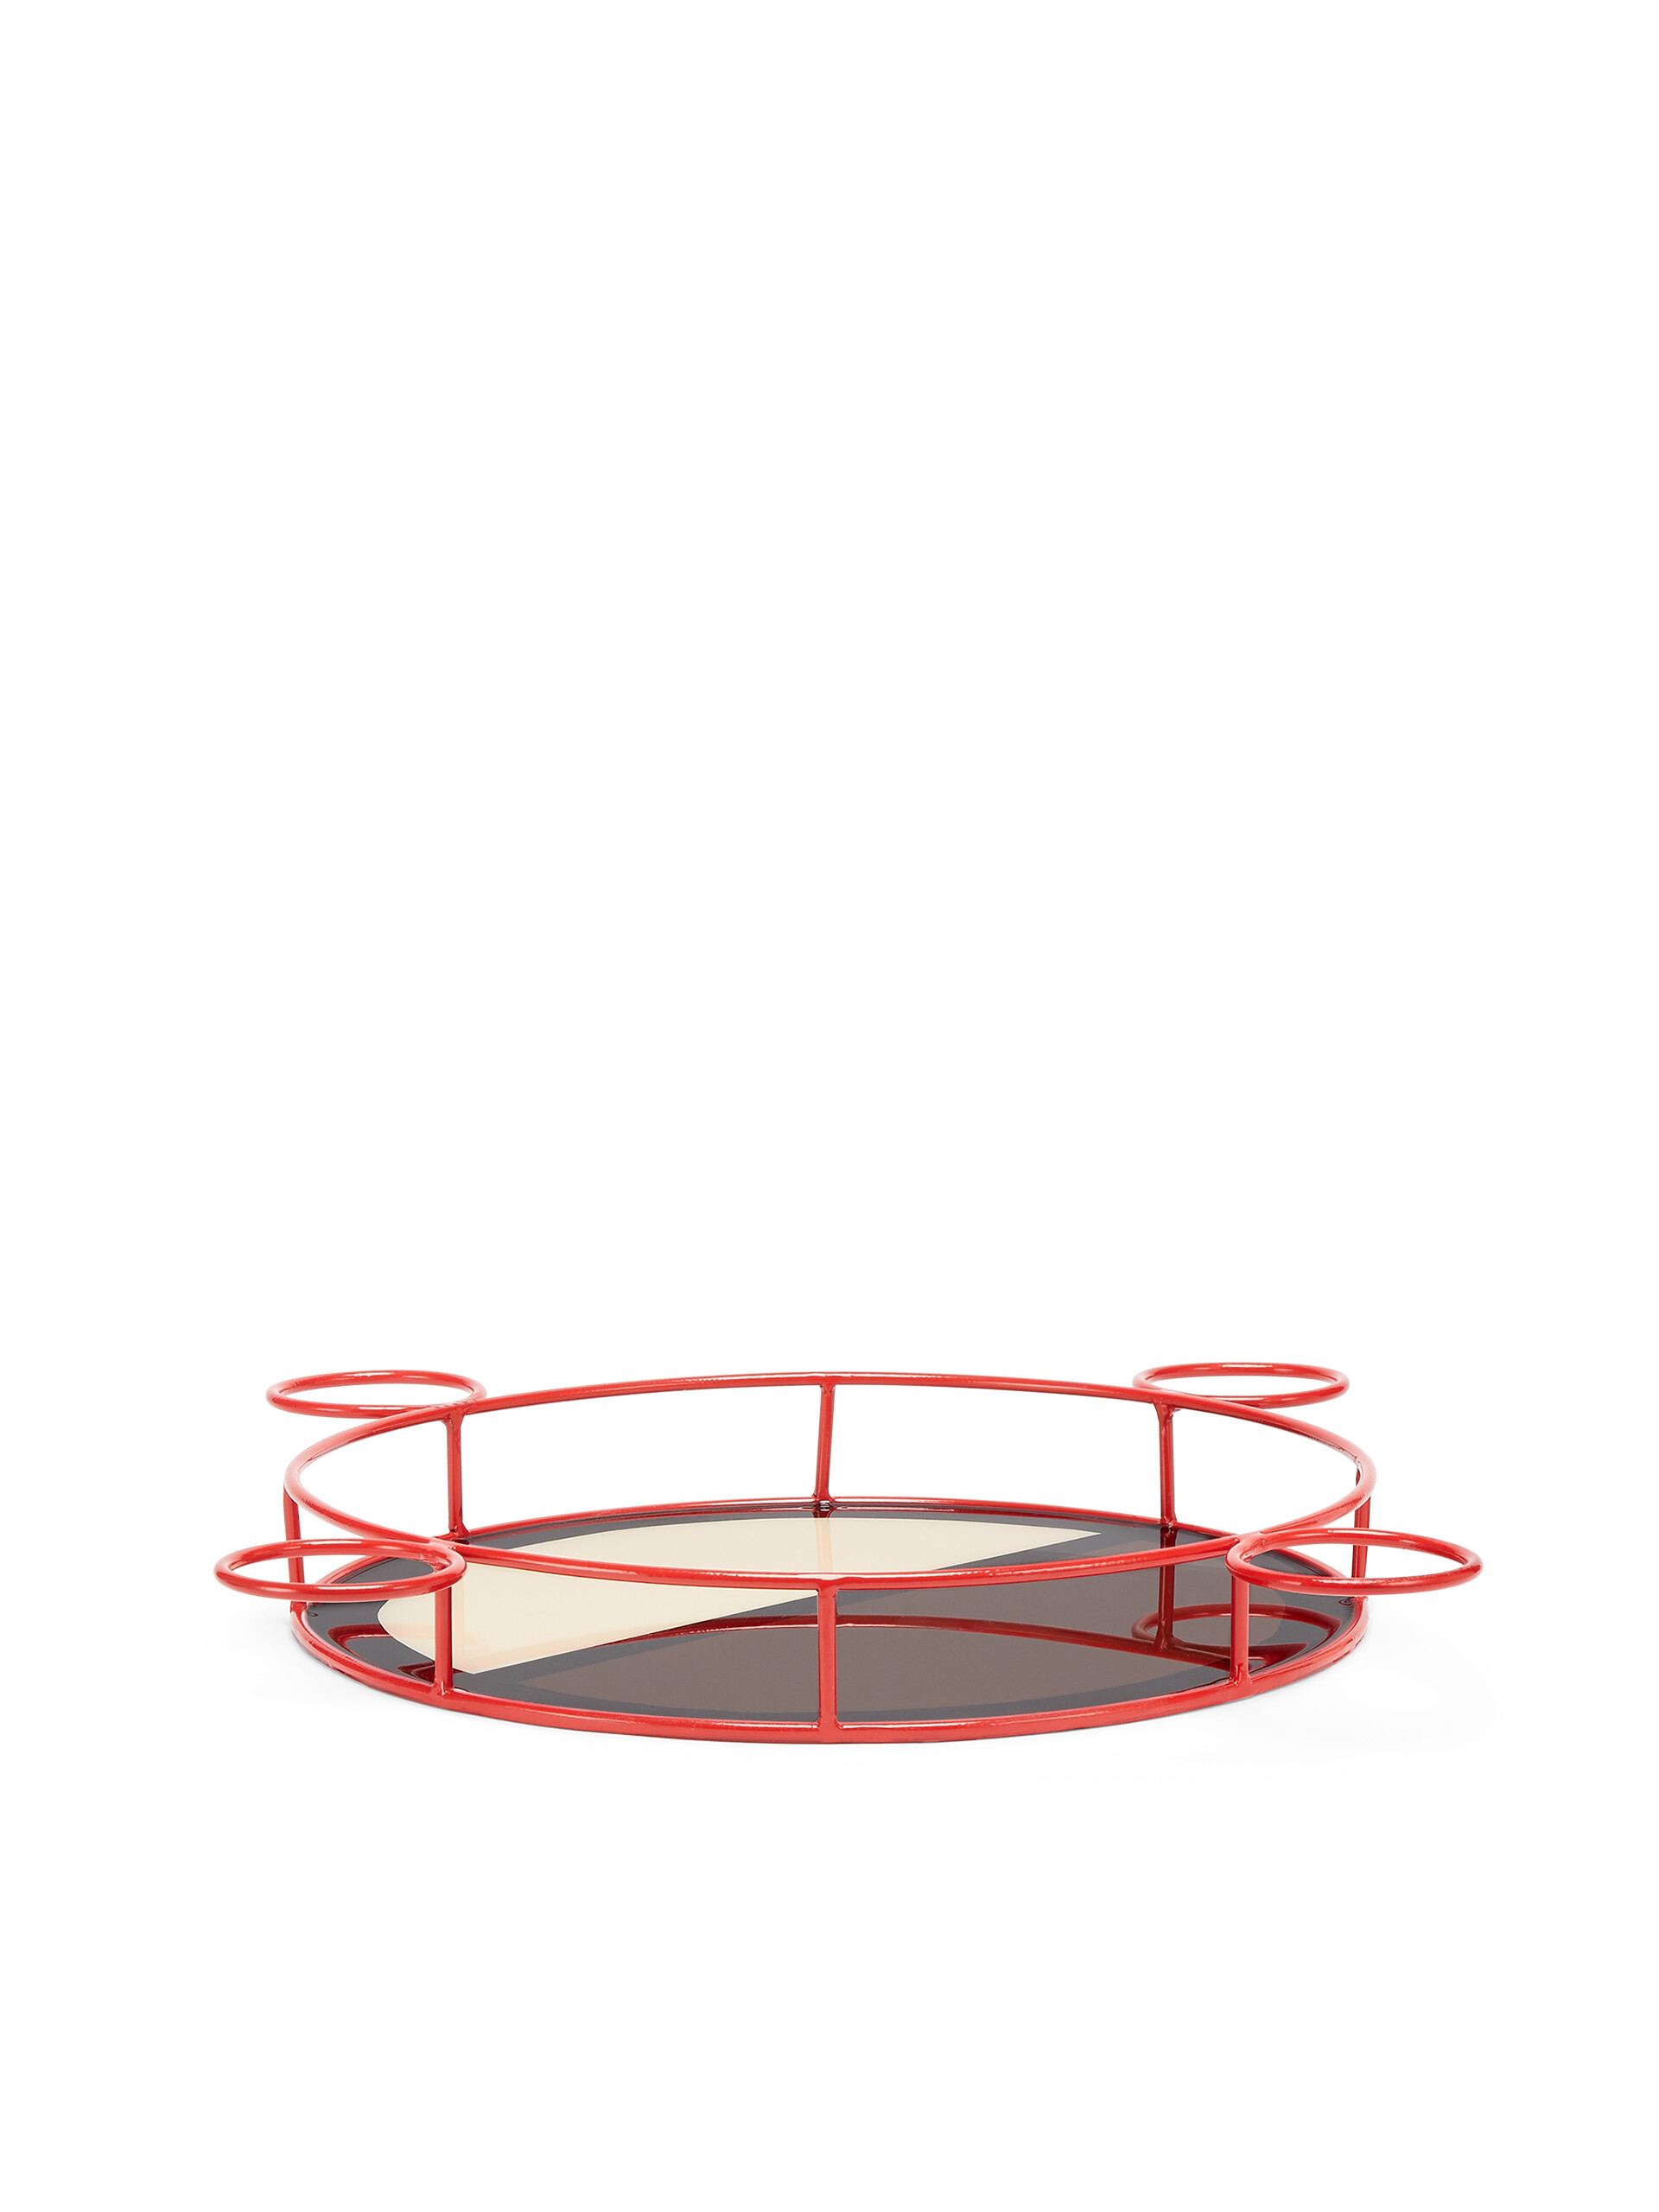 MARNI MARKET round tray in iron and beige, brown and black resin - Accessories - Image 2